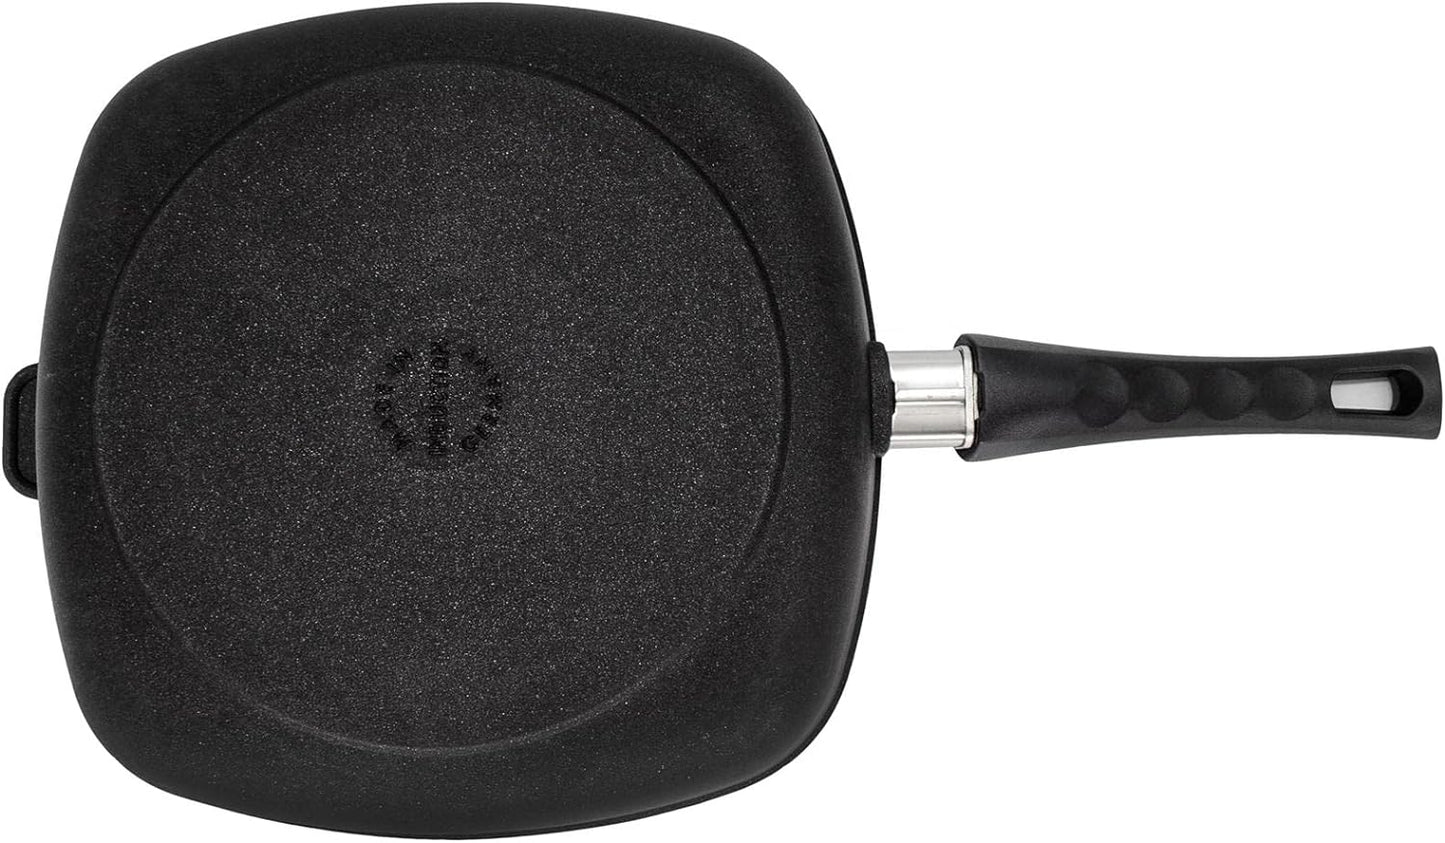 Eurolux premium square braising pan, Induction friendly, Removable Handle, Made in Germany